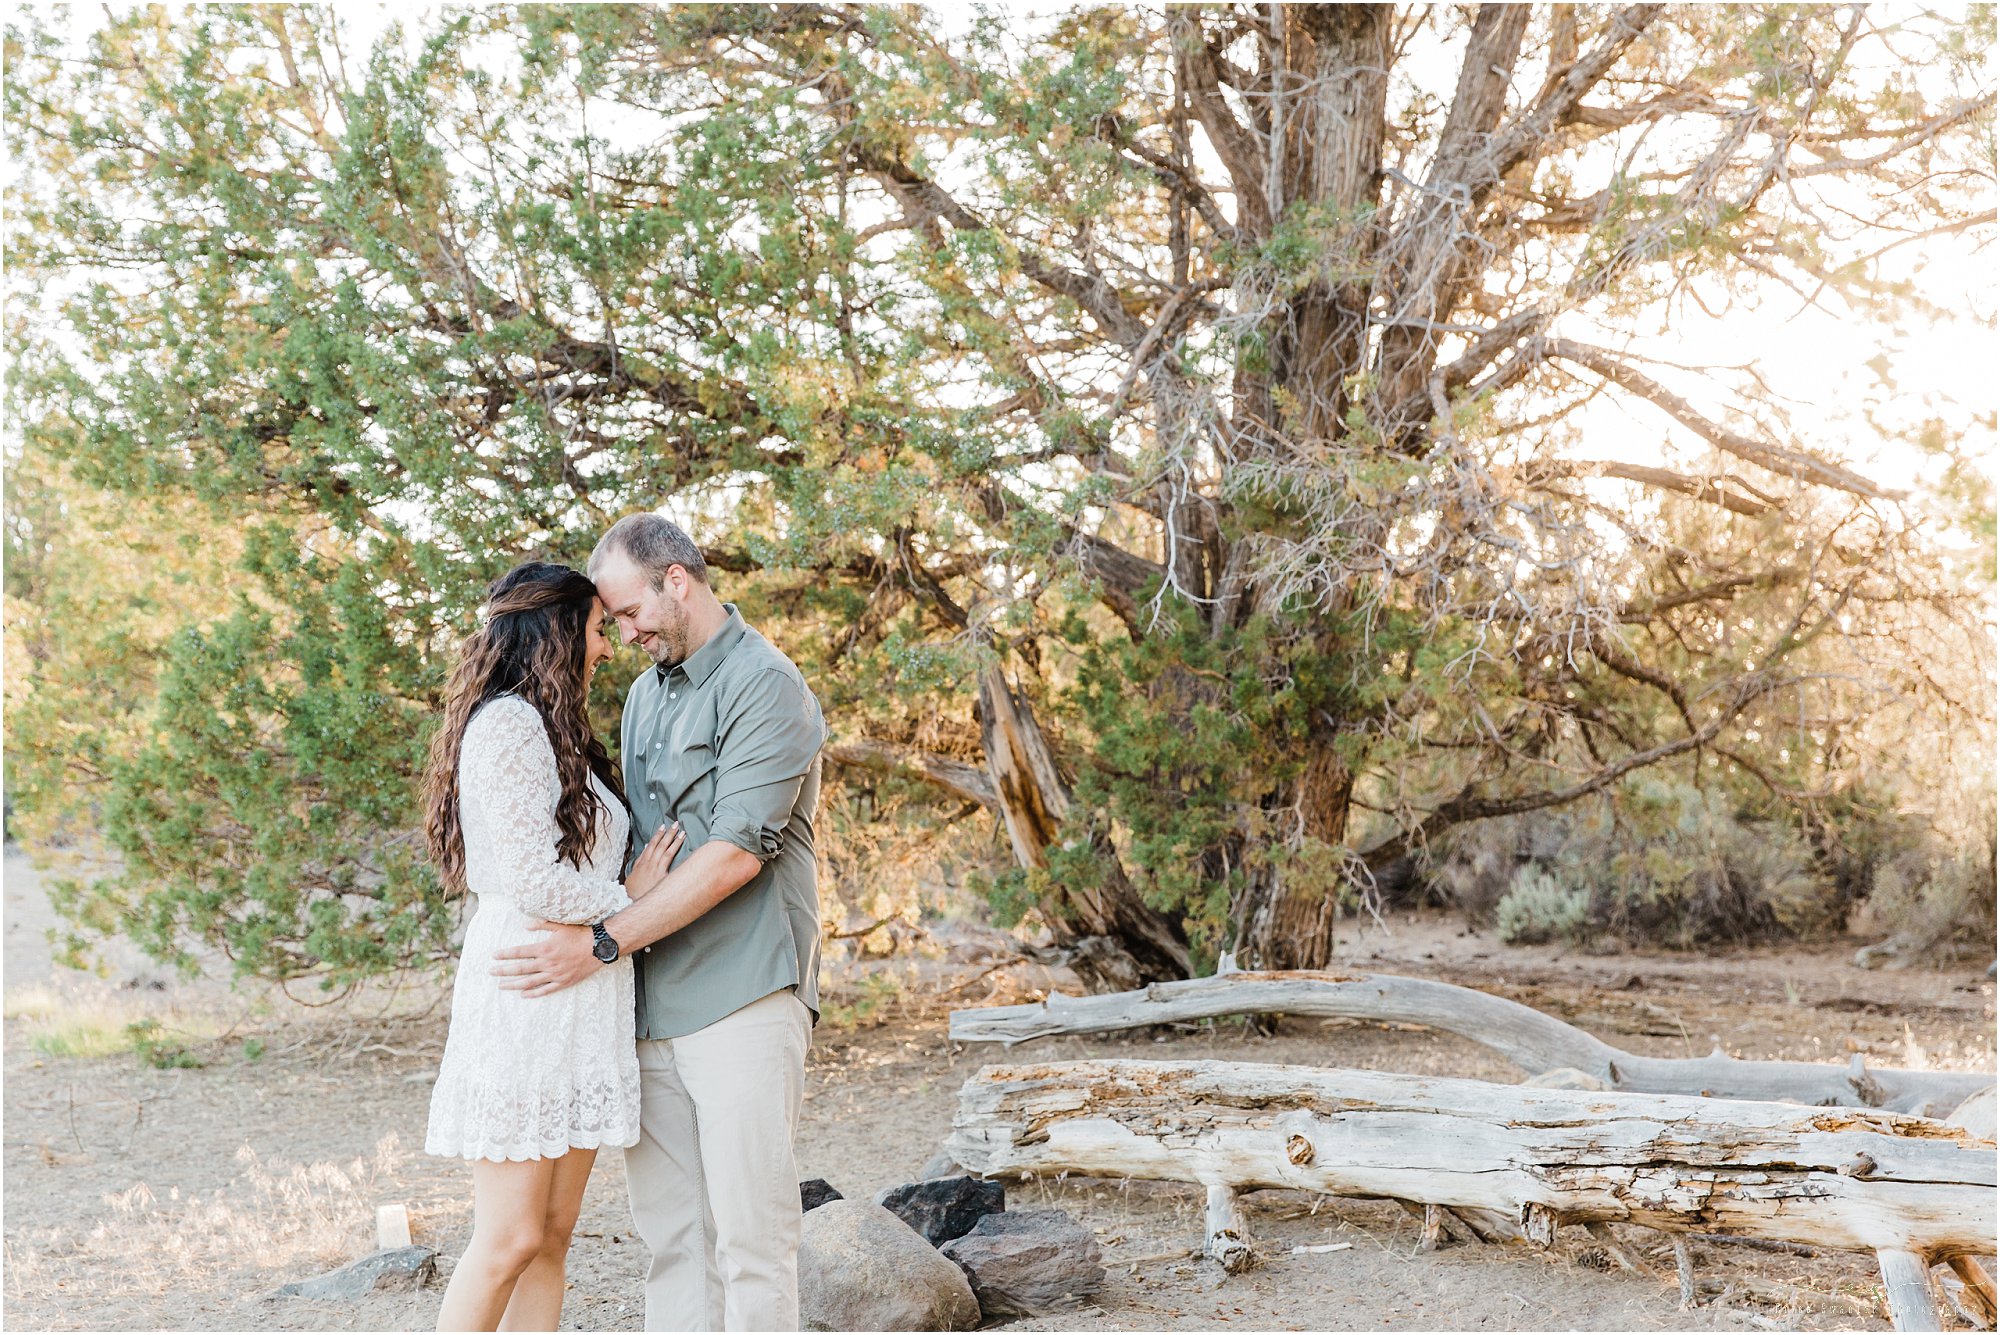 The sun peeks through the Juniper trees at this gorgeous Tumalo Falls engagement photos session near Bend, OR. | Erica Swantek Photography